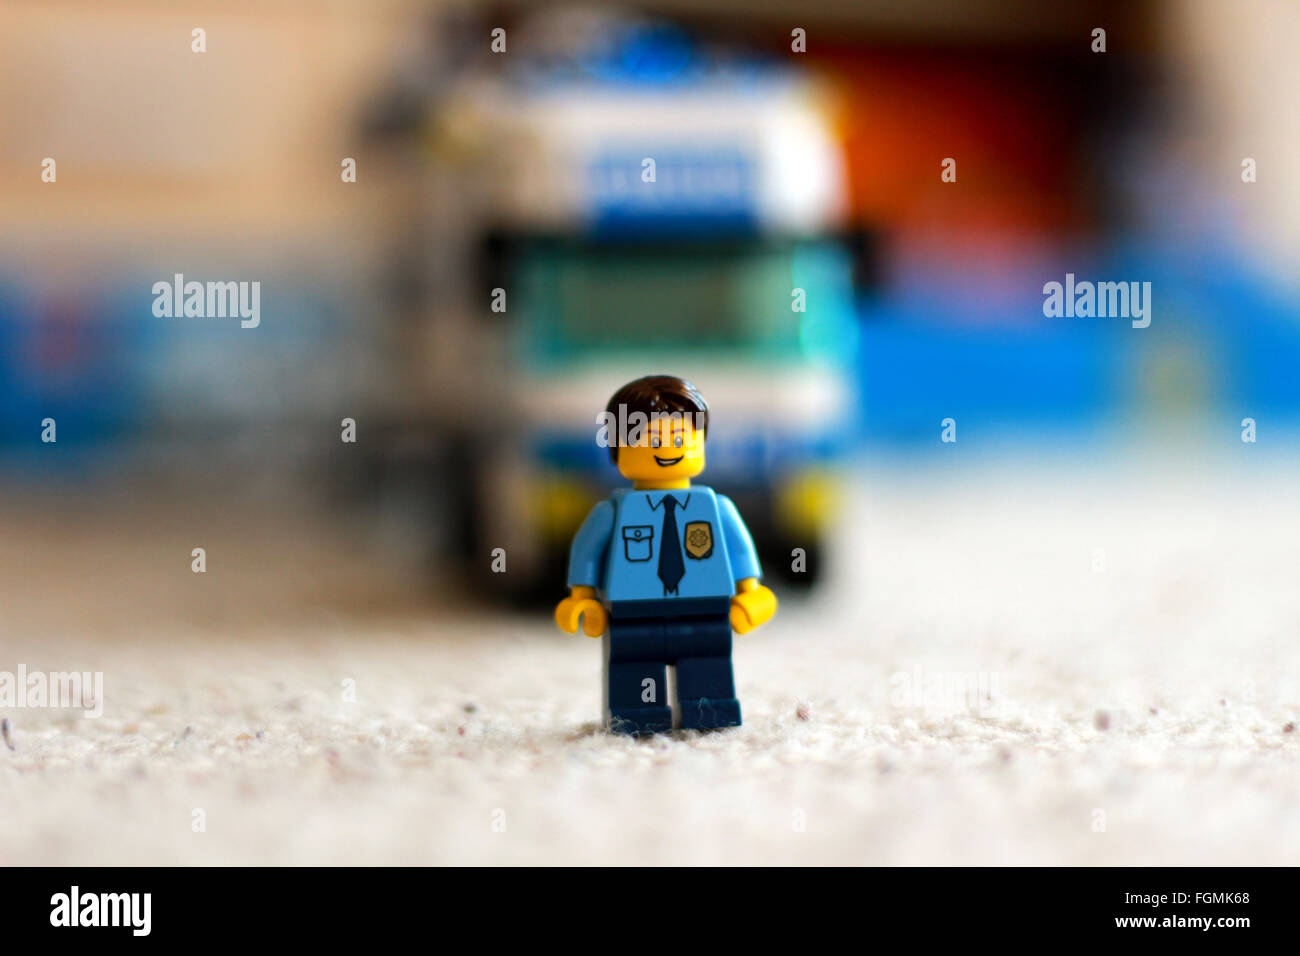 Lego figure of policeman with truck in background Stock Photo